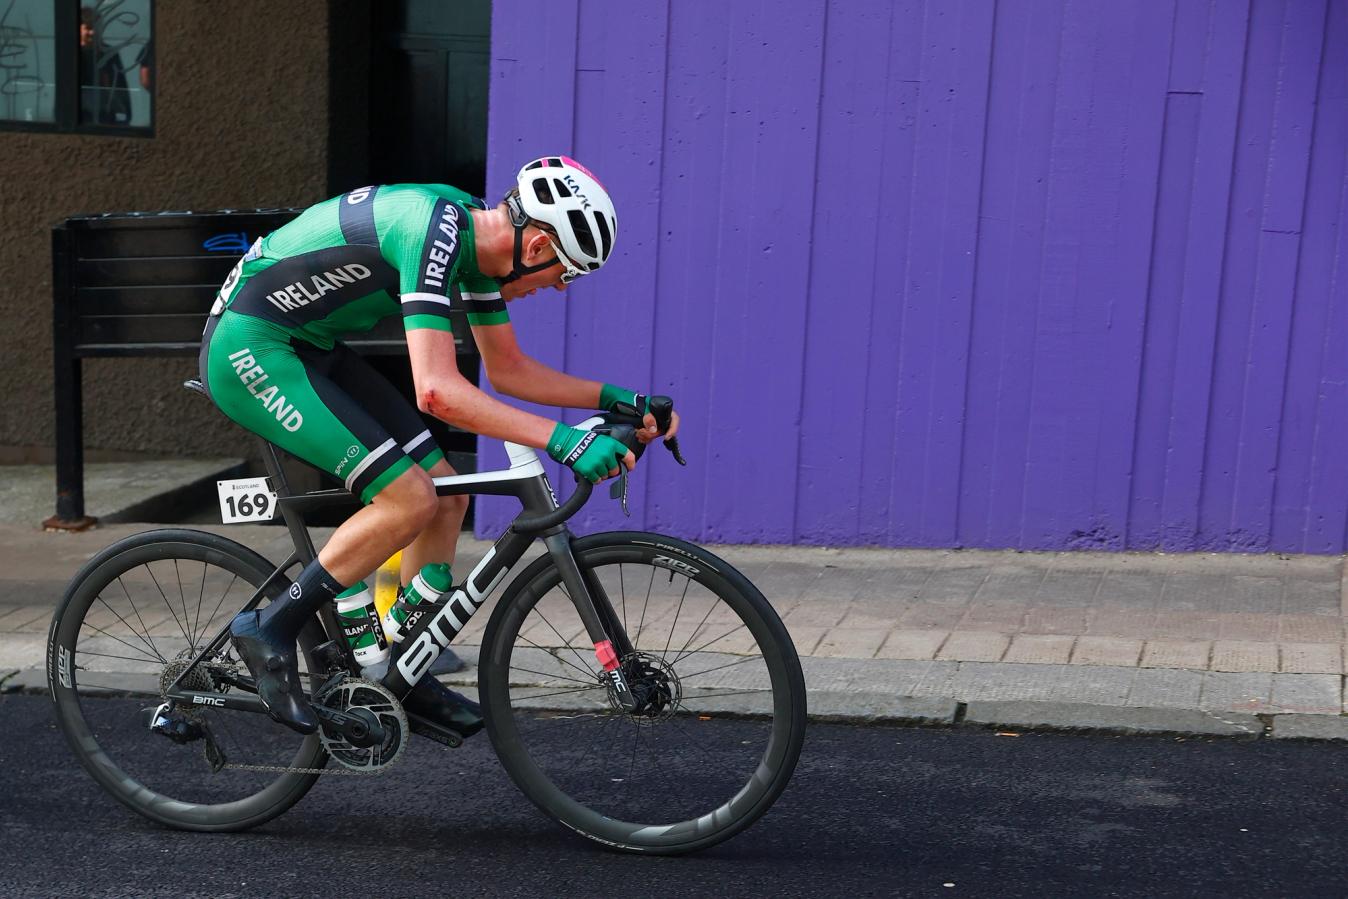 Darren Rafferty's hopes in the World Championships U23 Road Race were scuppered by a crash in Glasgow